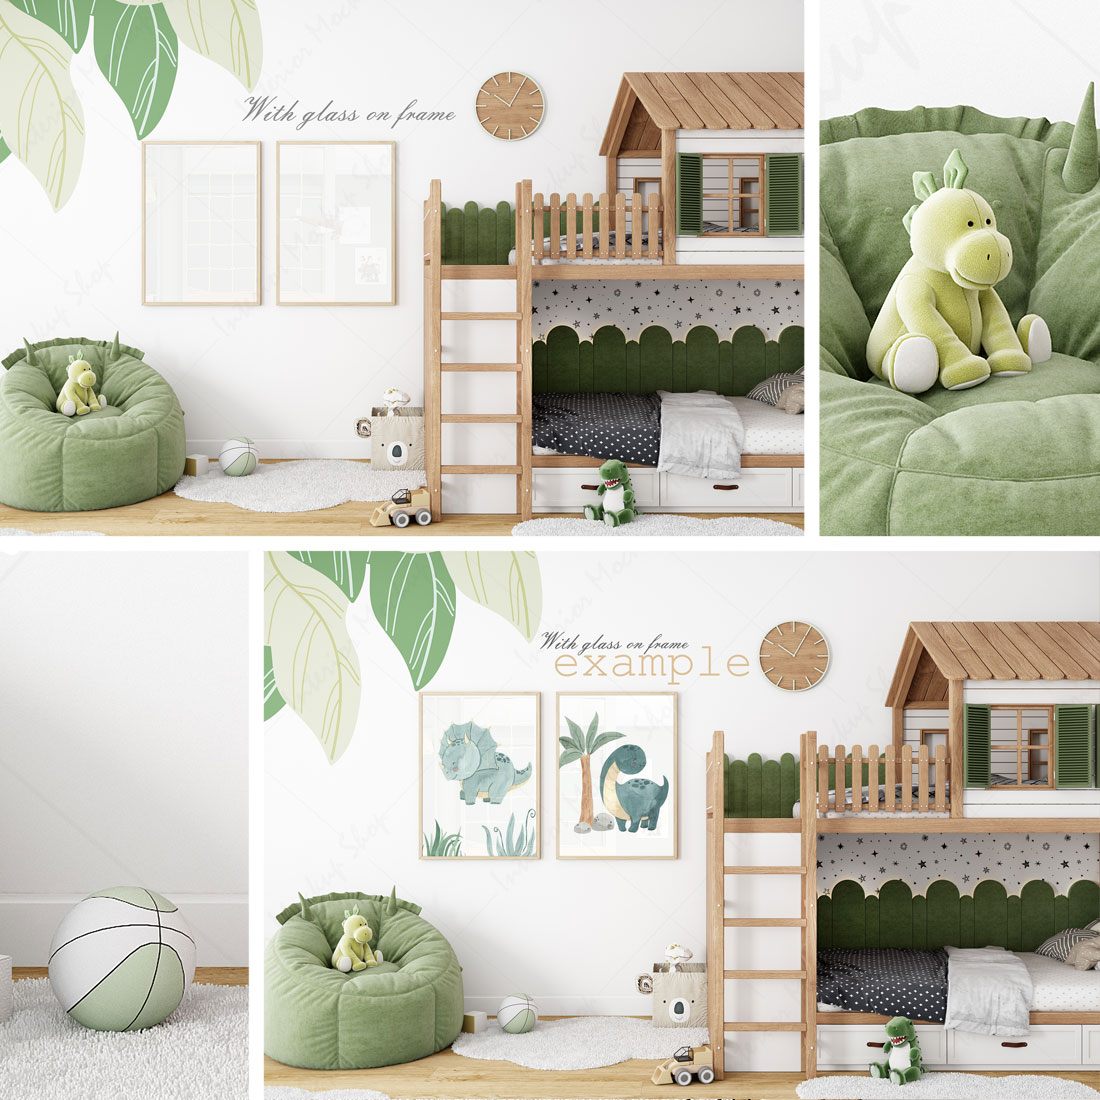 Child's bedroom with a bunk bed and a green chair.